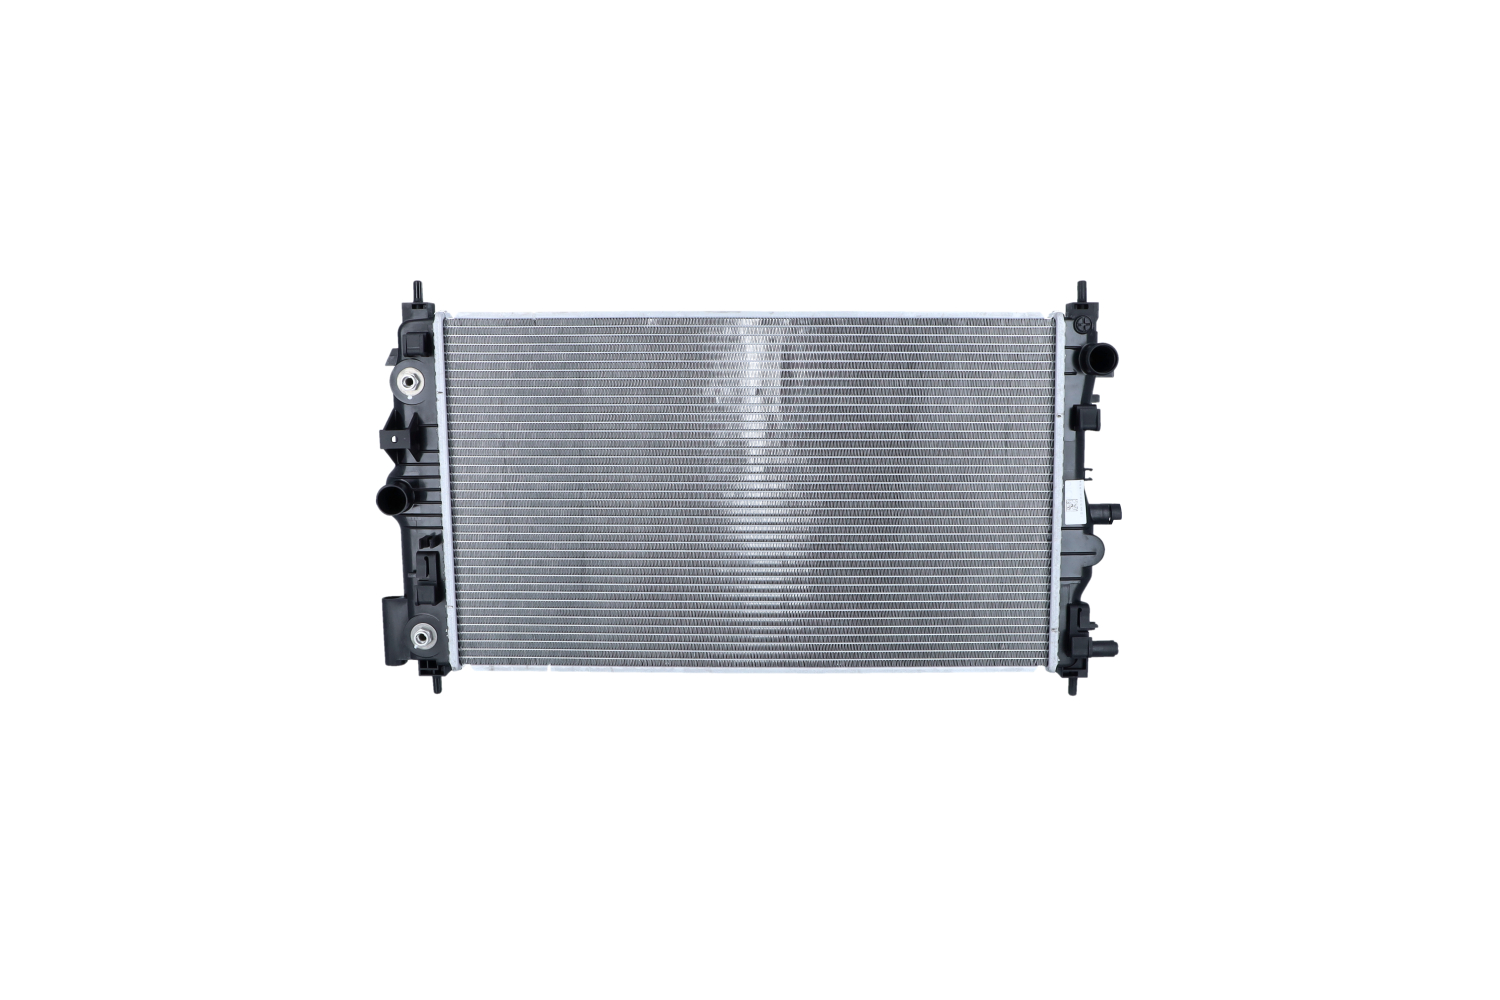 NRF 53131 Engine radiator Aluminium, 680 x 382 x 28 mm, with mounting parts, Brazed cooling fins